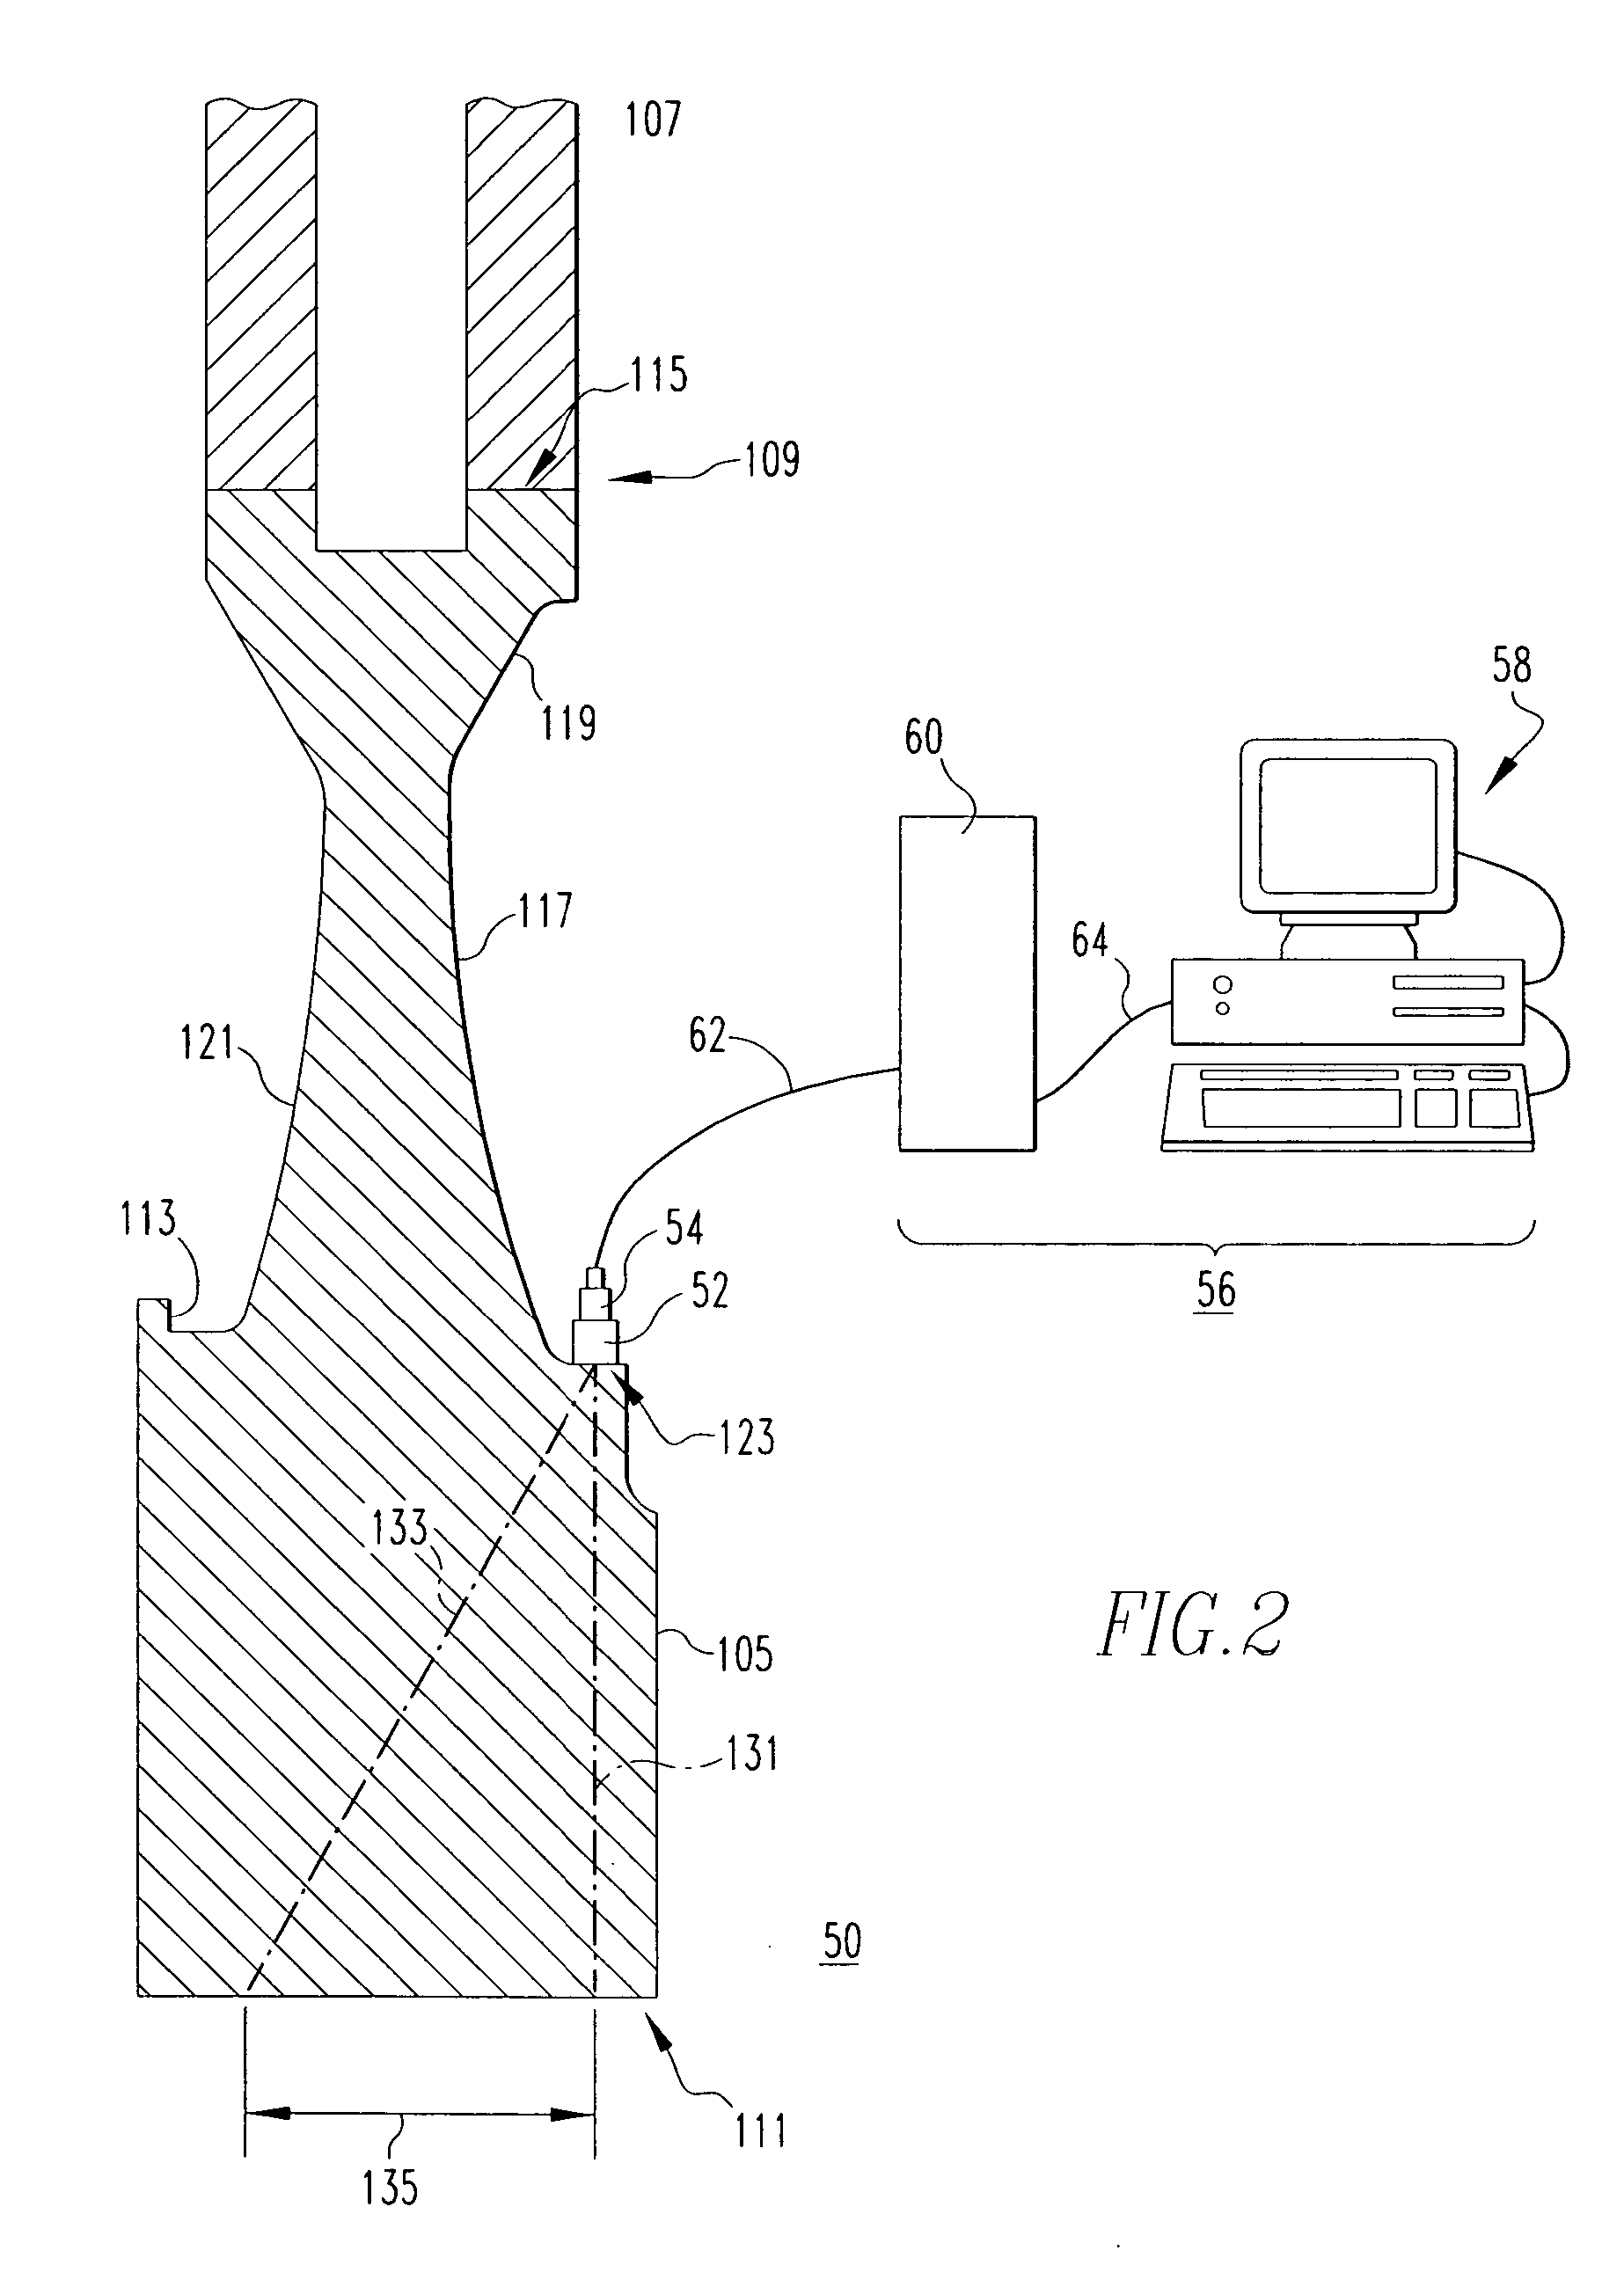 Phased array ultrasonic testing system and methods of examination and modeling employing the same